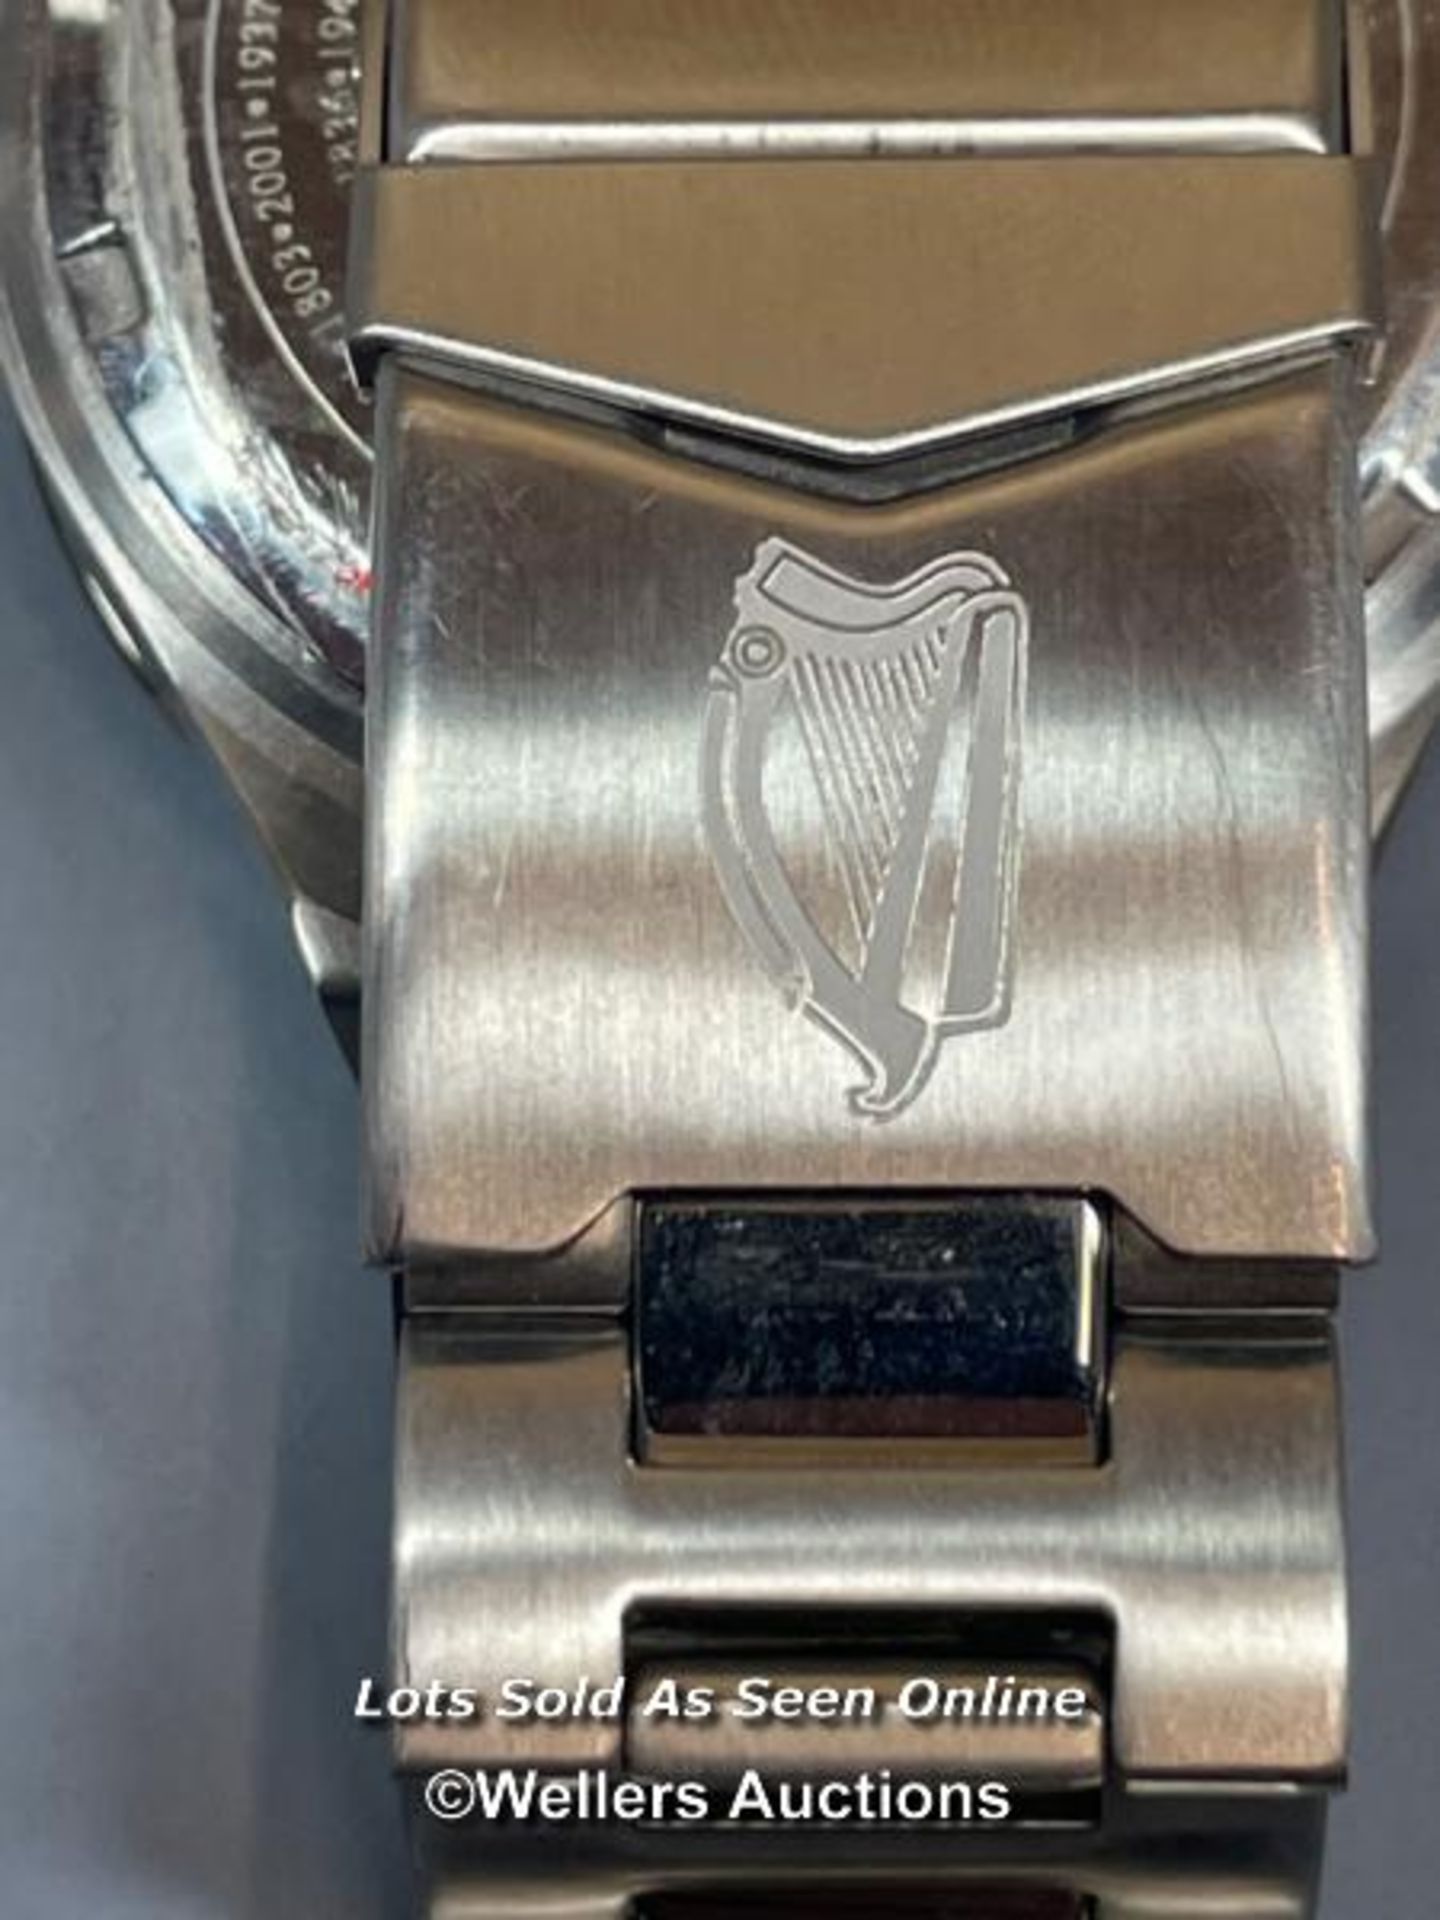 ERIN GO BRAGH GENTS WATCH LIMITED EDITION NO.1372 / 4999, GUINESS LOGO ON THE BRACELET - Image 5 of 5